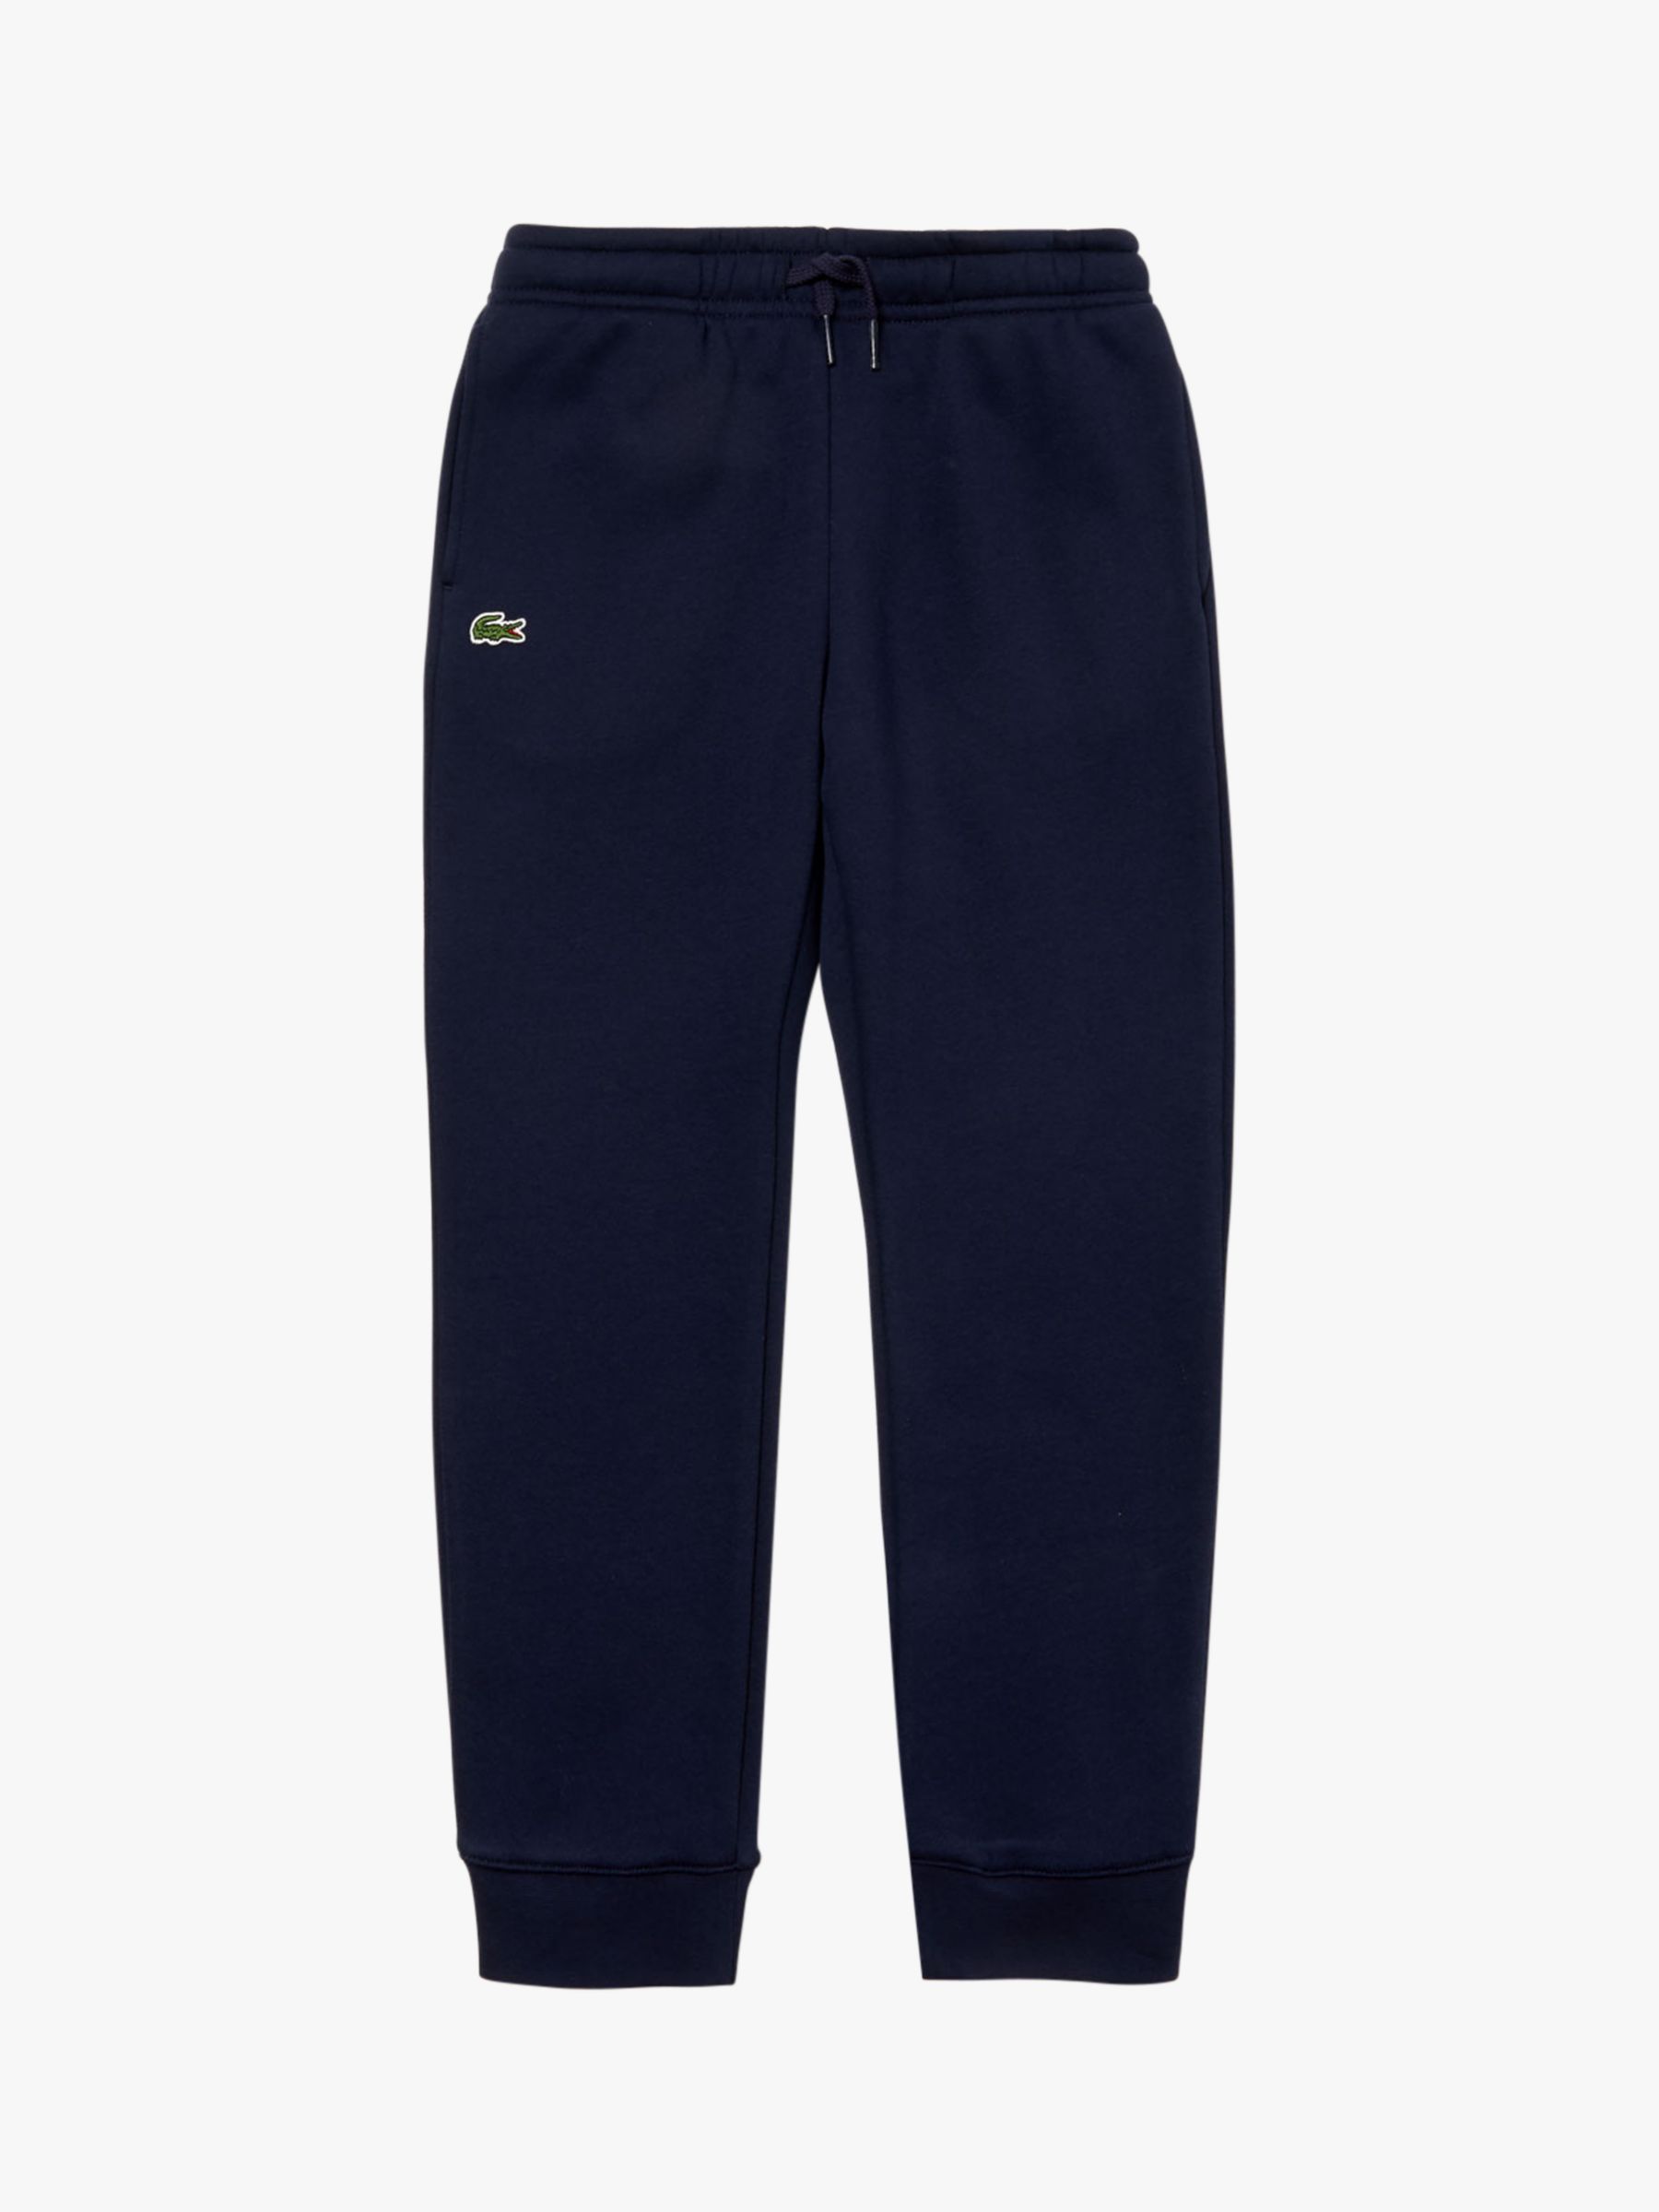 navy lacoste bottoms